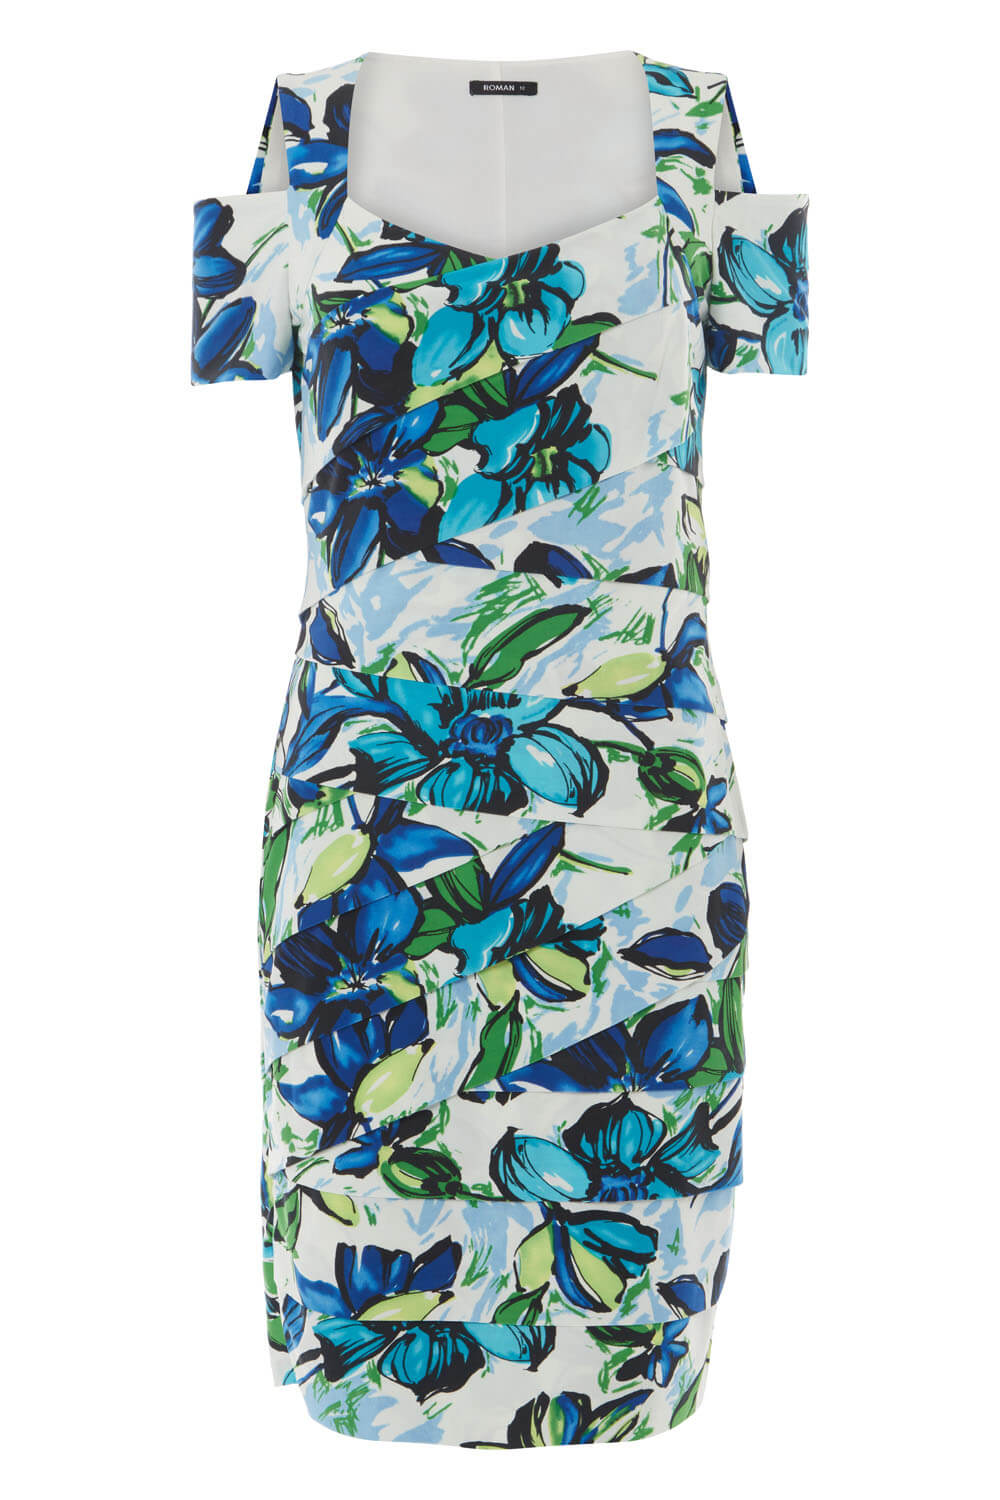 Blue Floral Shutter Pleat Fitted Dress, Image 5 of 5